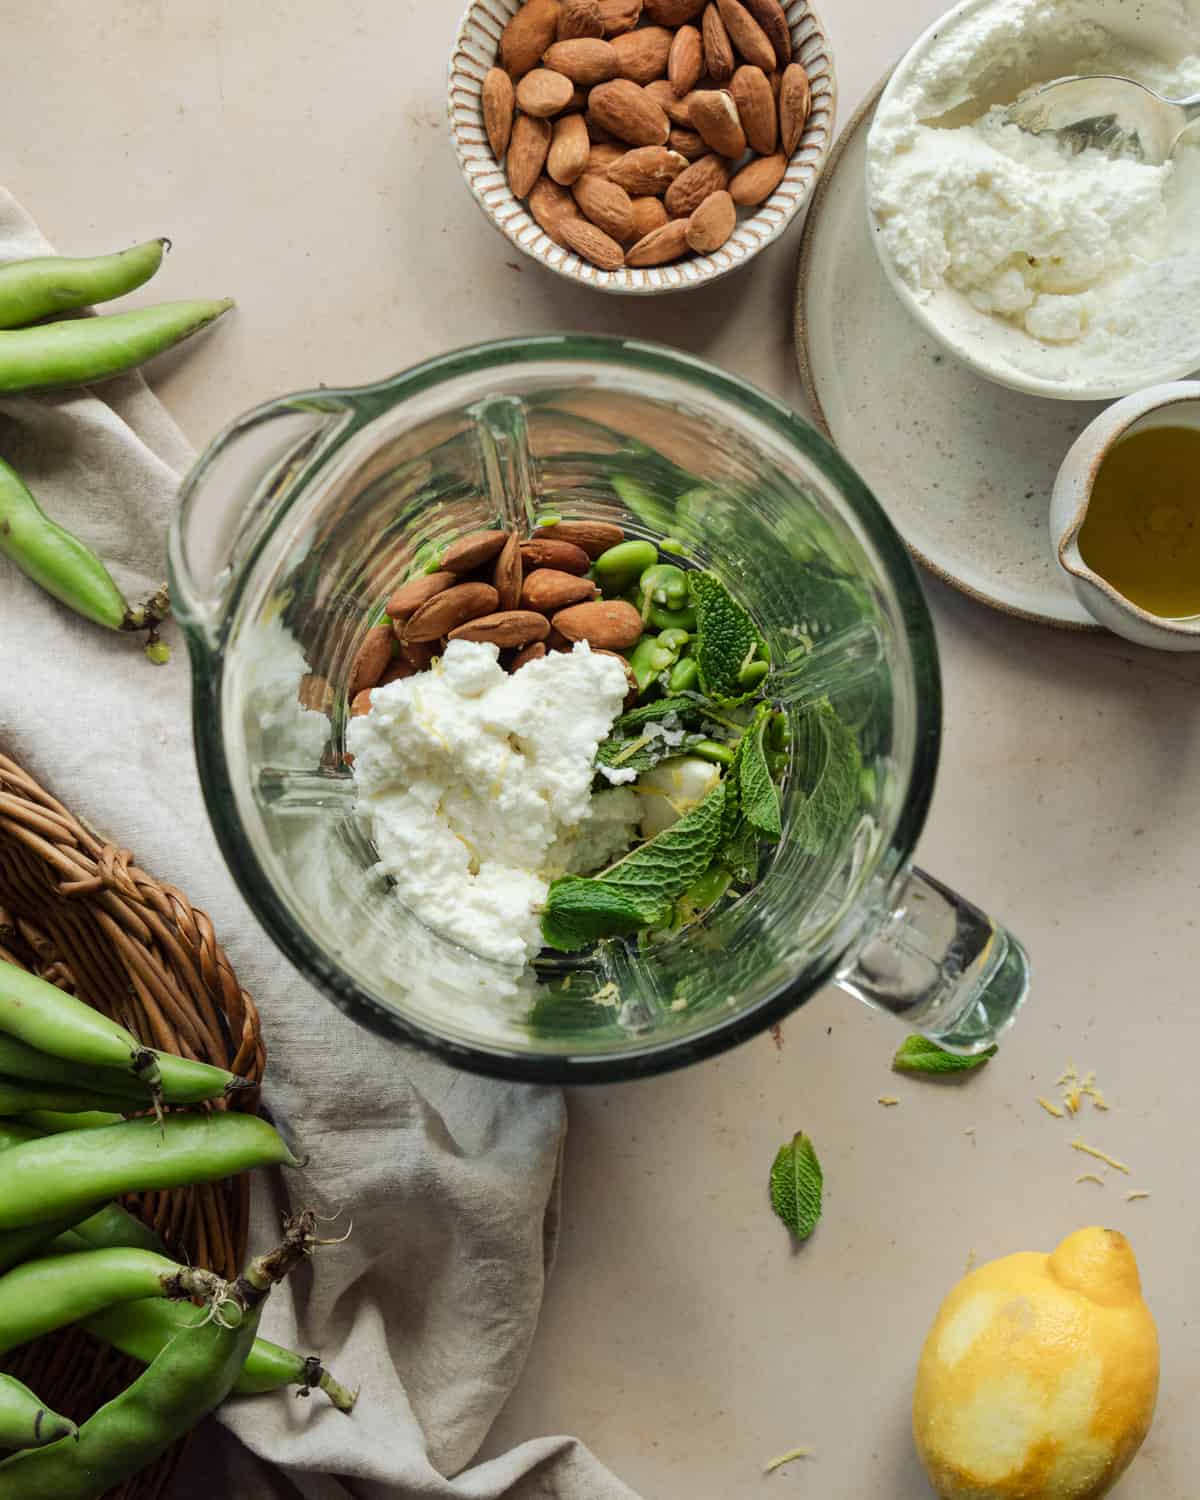 Blend with ingredientes inside for the broad fava beans hummus and pesto without pine nuts.